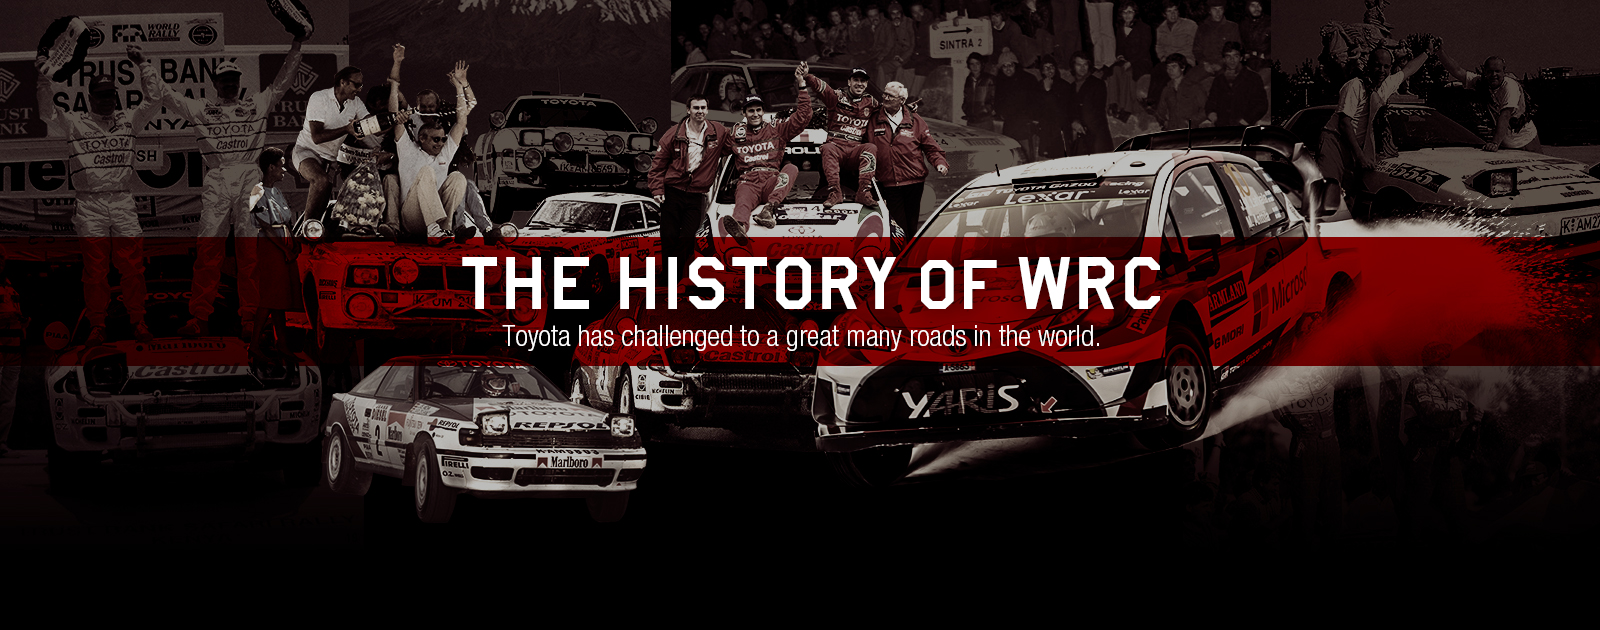 The history of WRC and Toyota